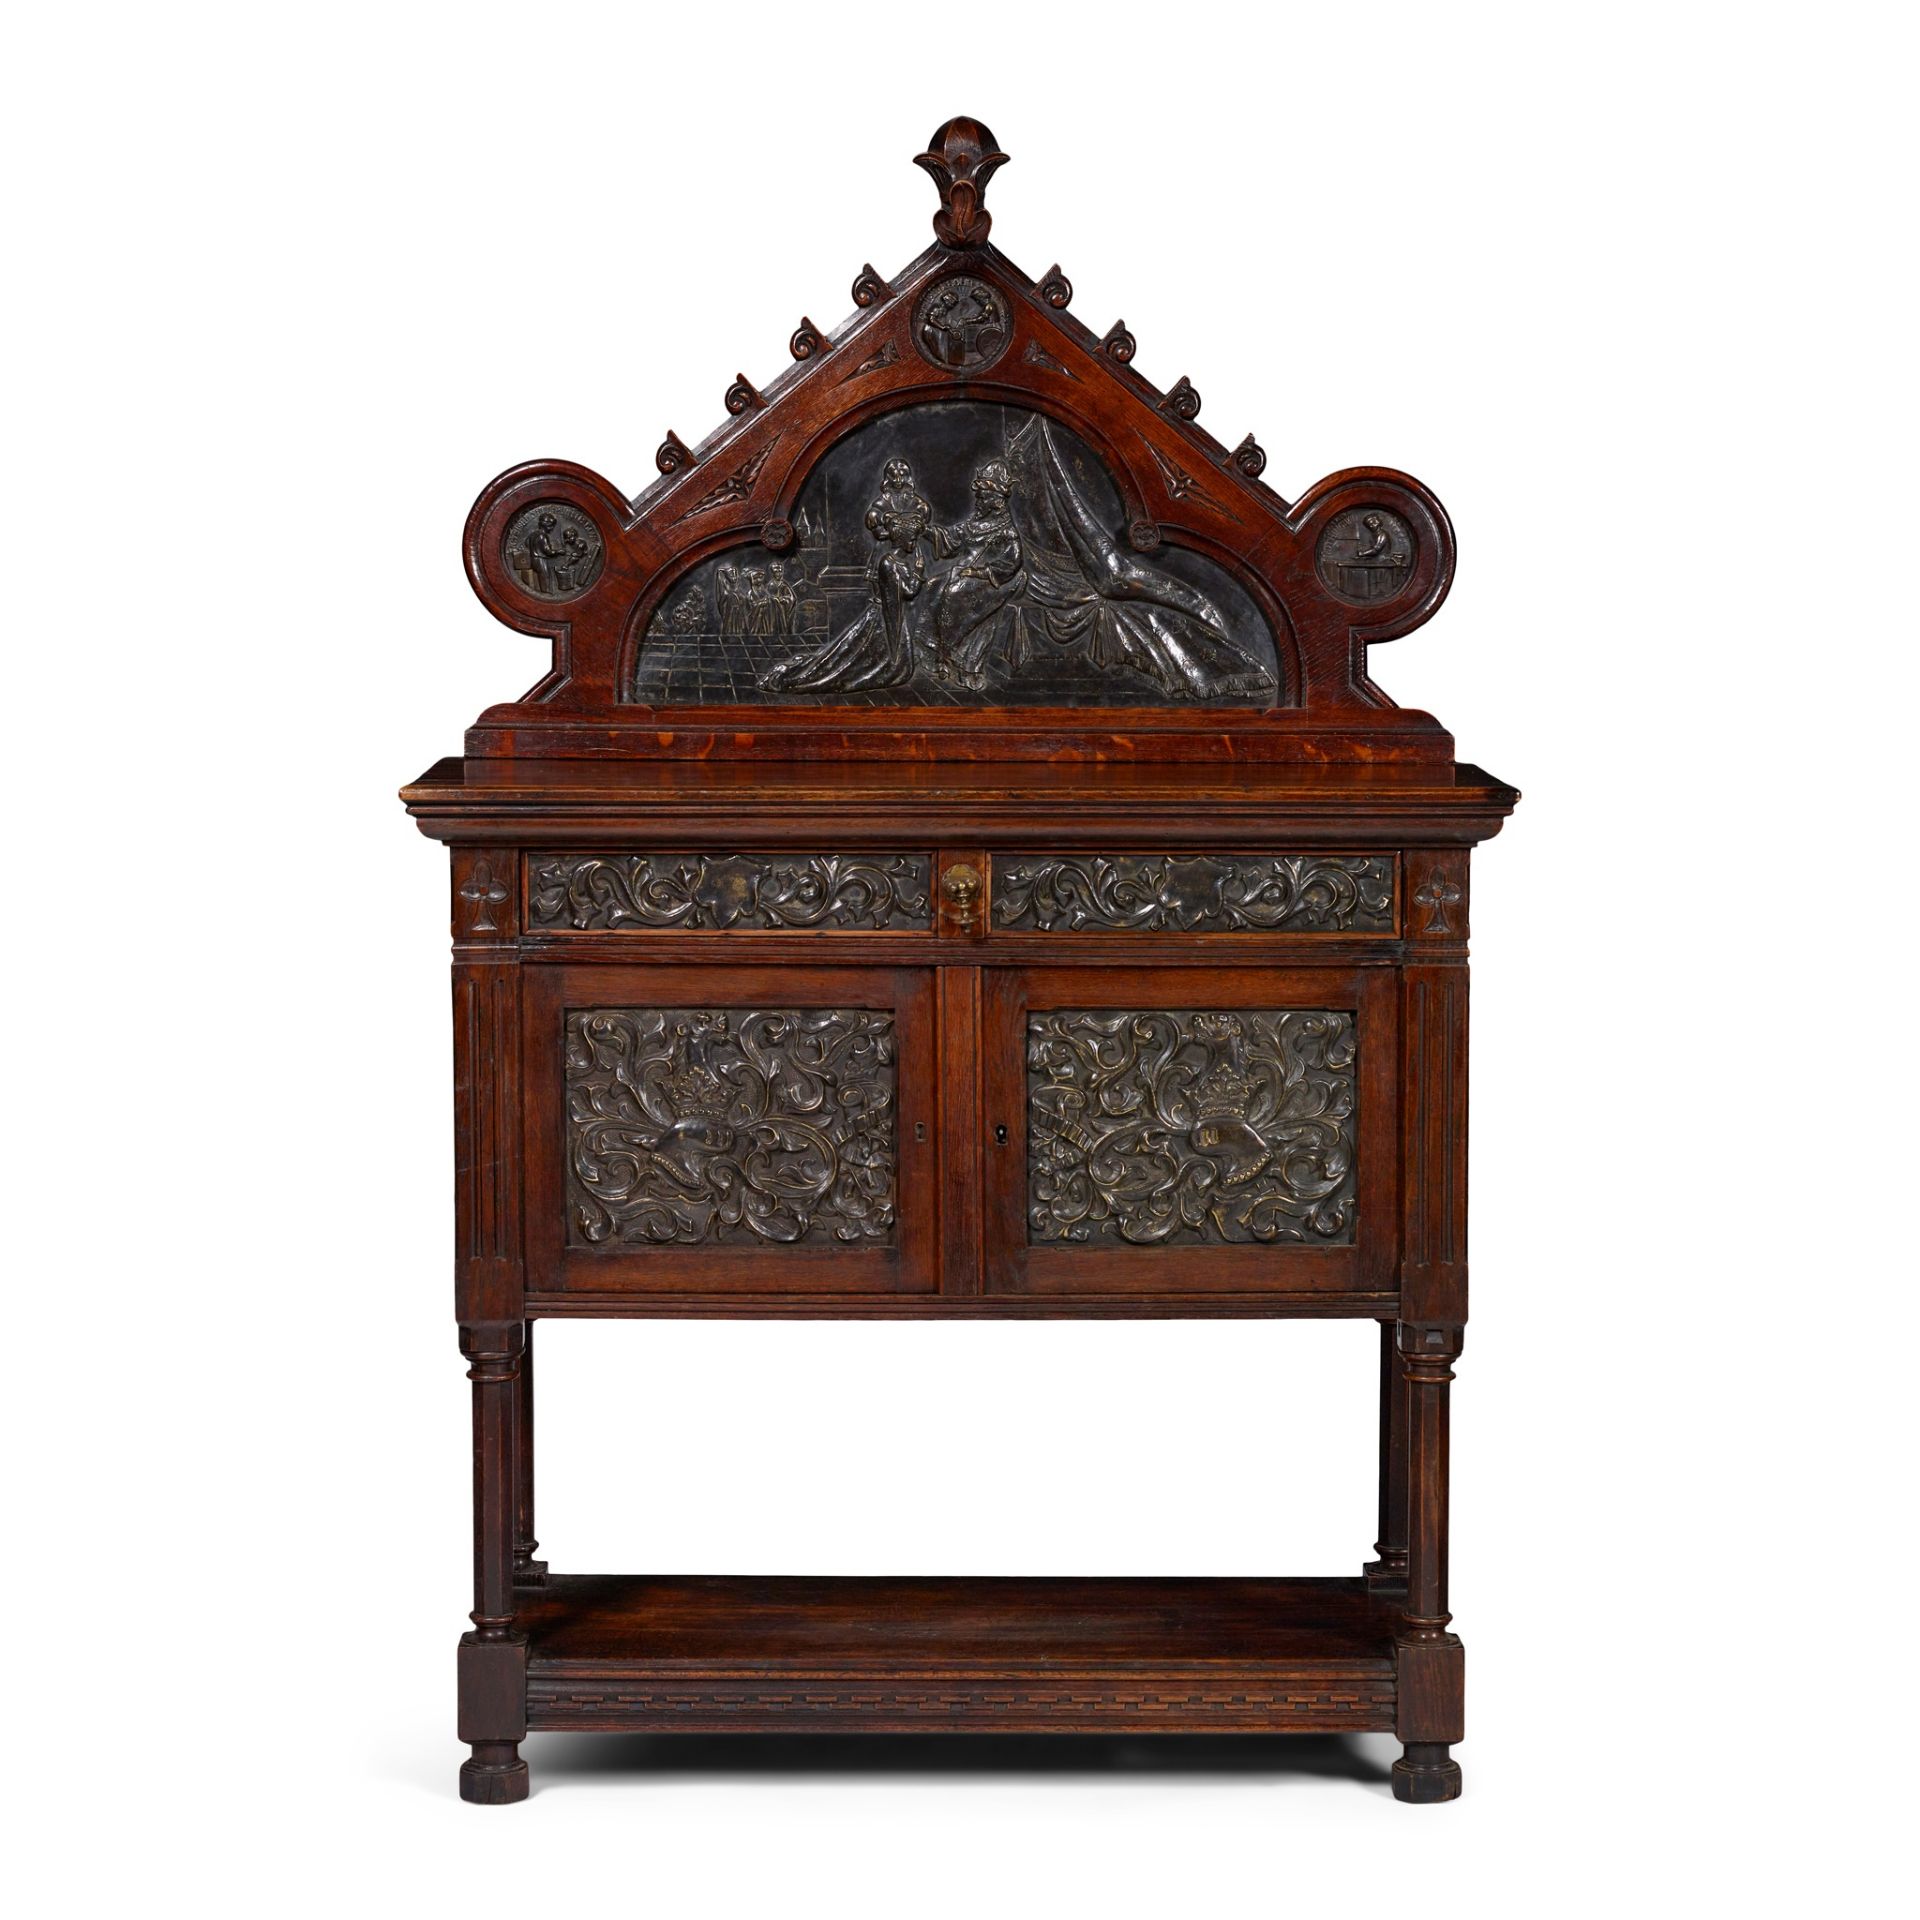 COX & SONS, LONDON (ATTRIBUTED MAKER) GOTHIC REVIVAL SIDE CABINET, CIRCA 1870